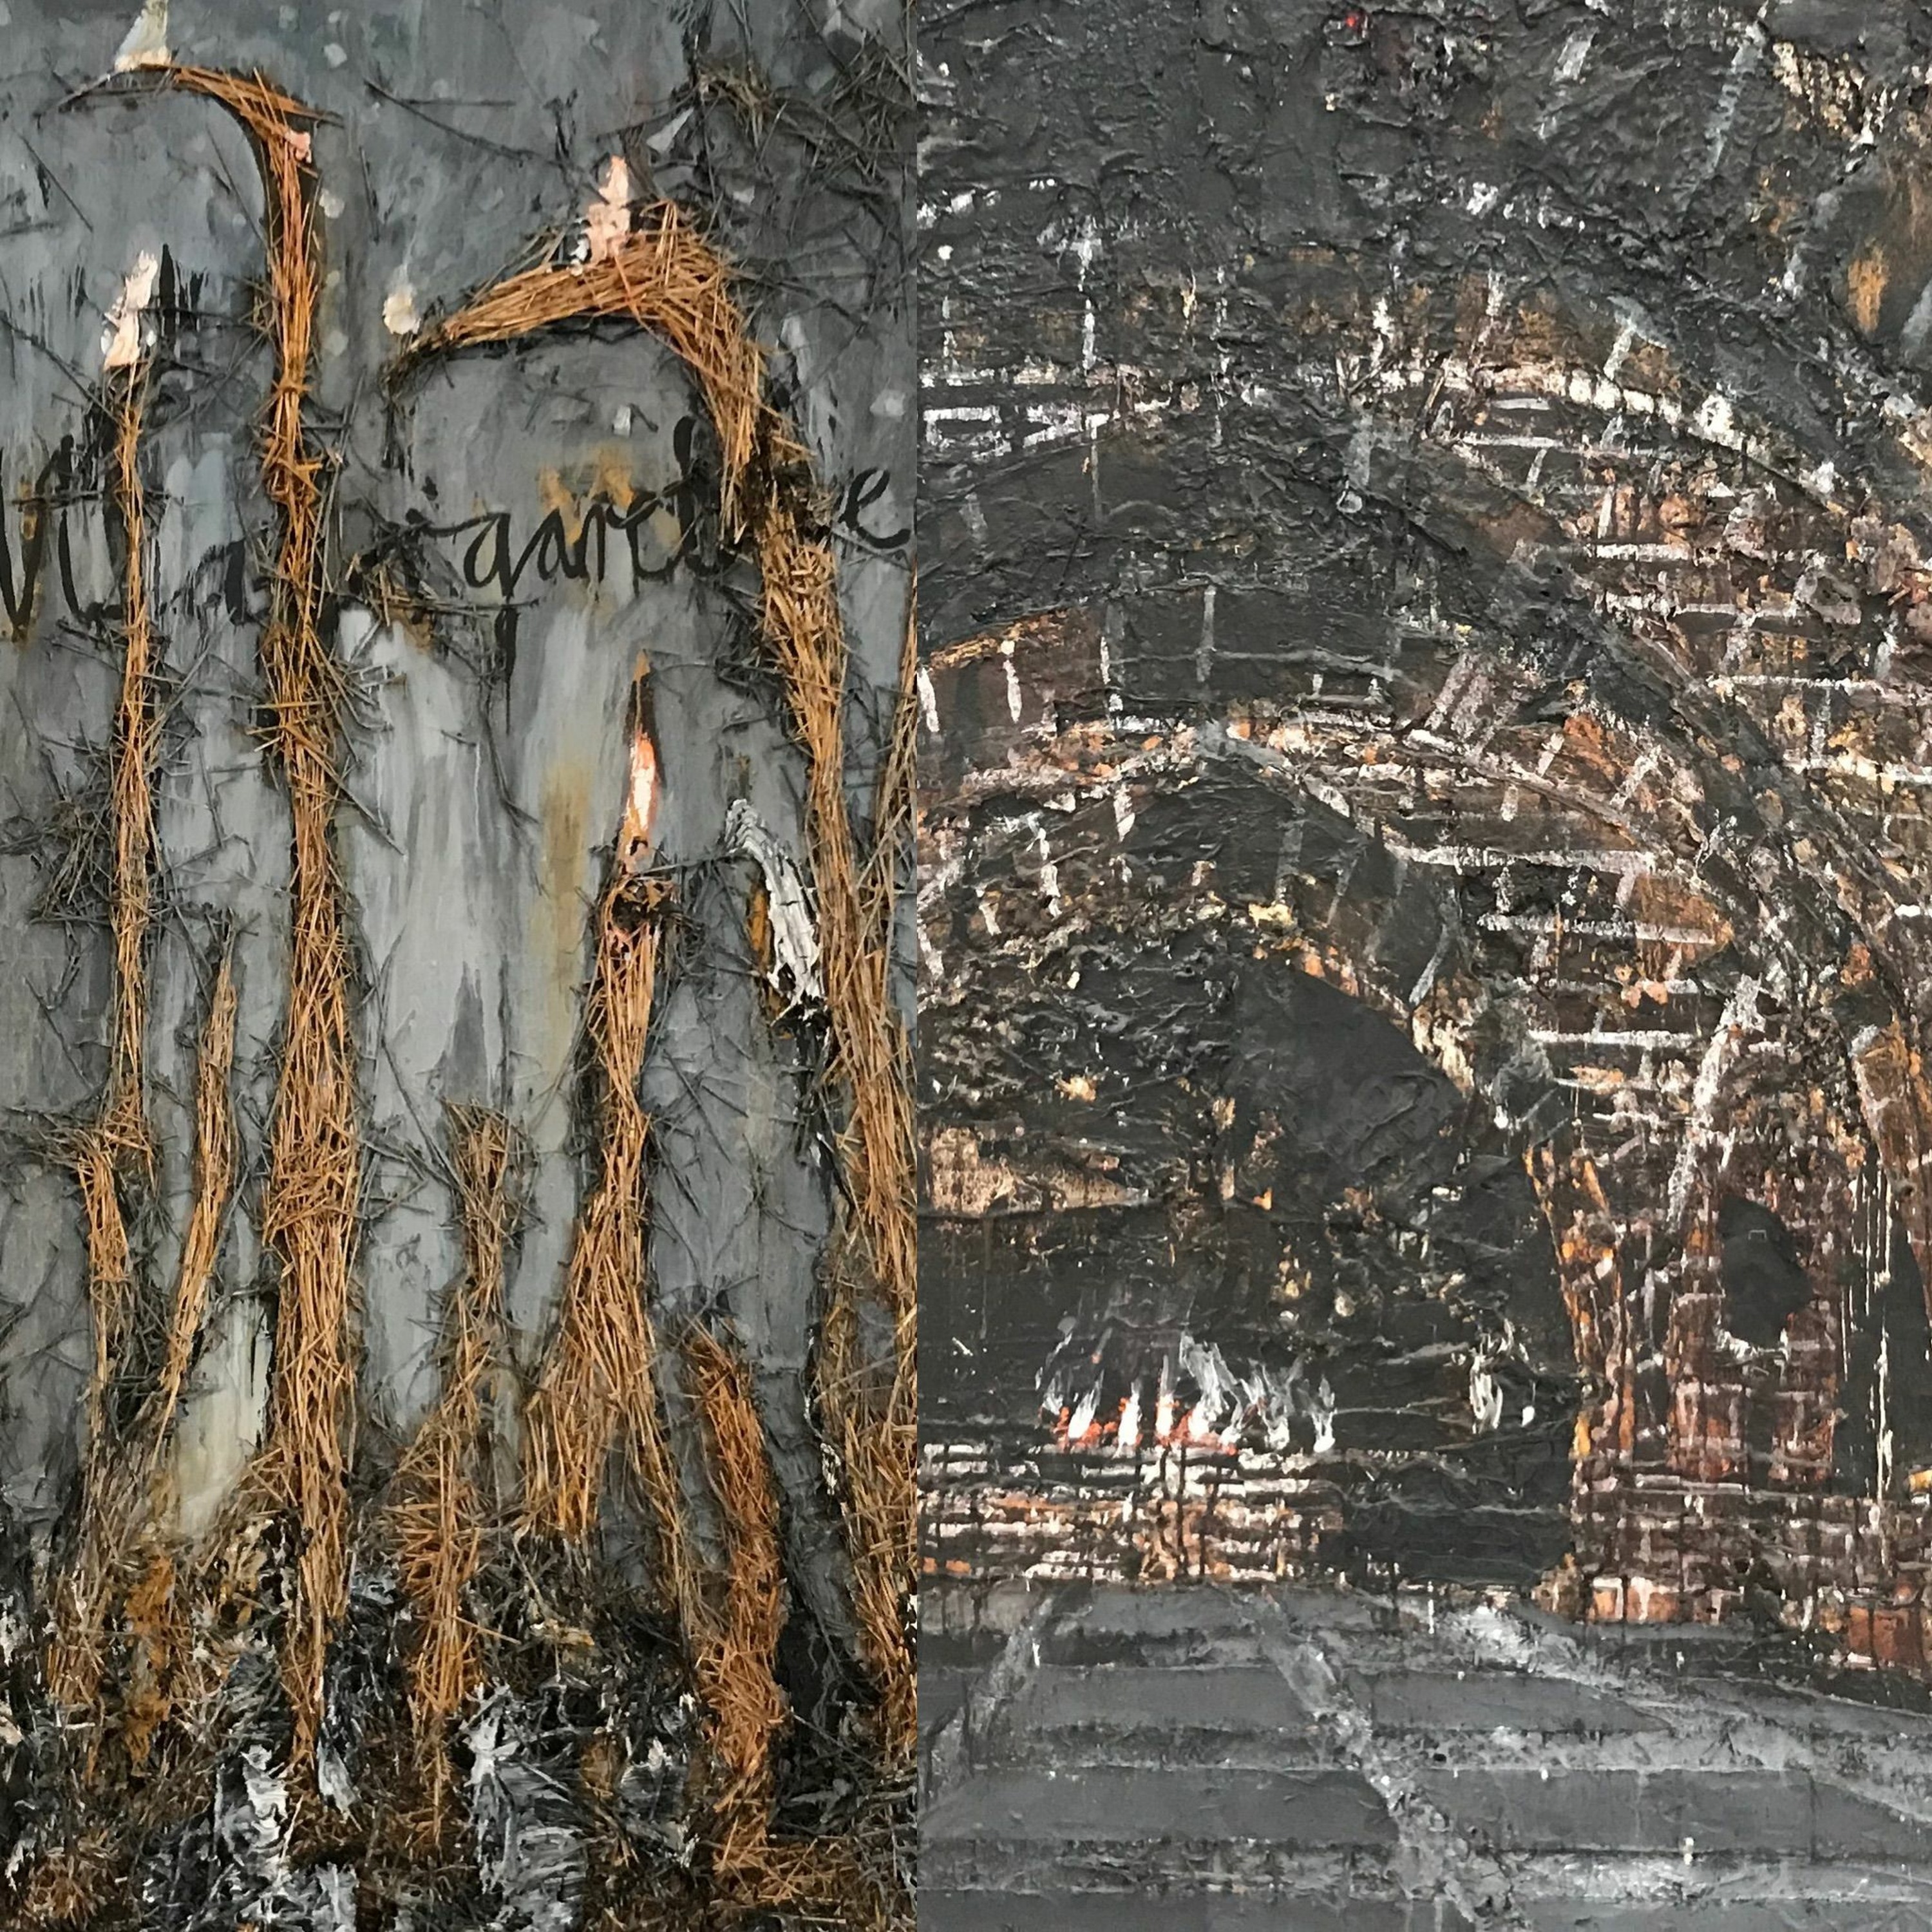 Ep. 48 - Anselm Kiefer's "Margarete" and "Sulamith" (1981)